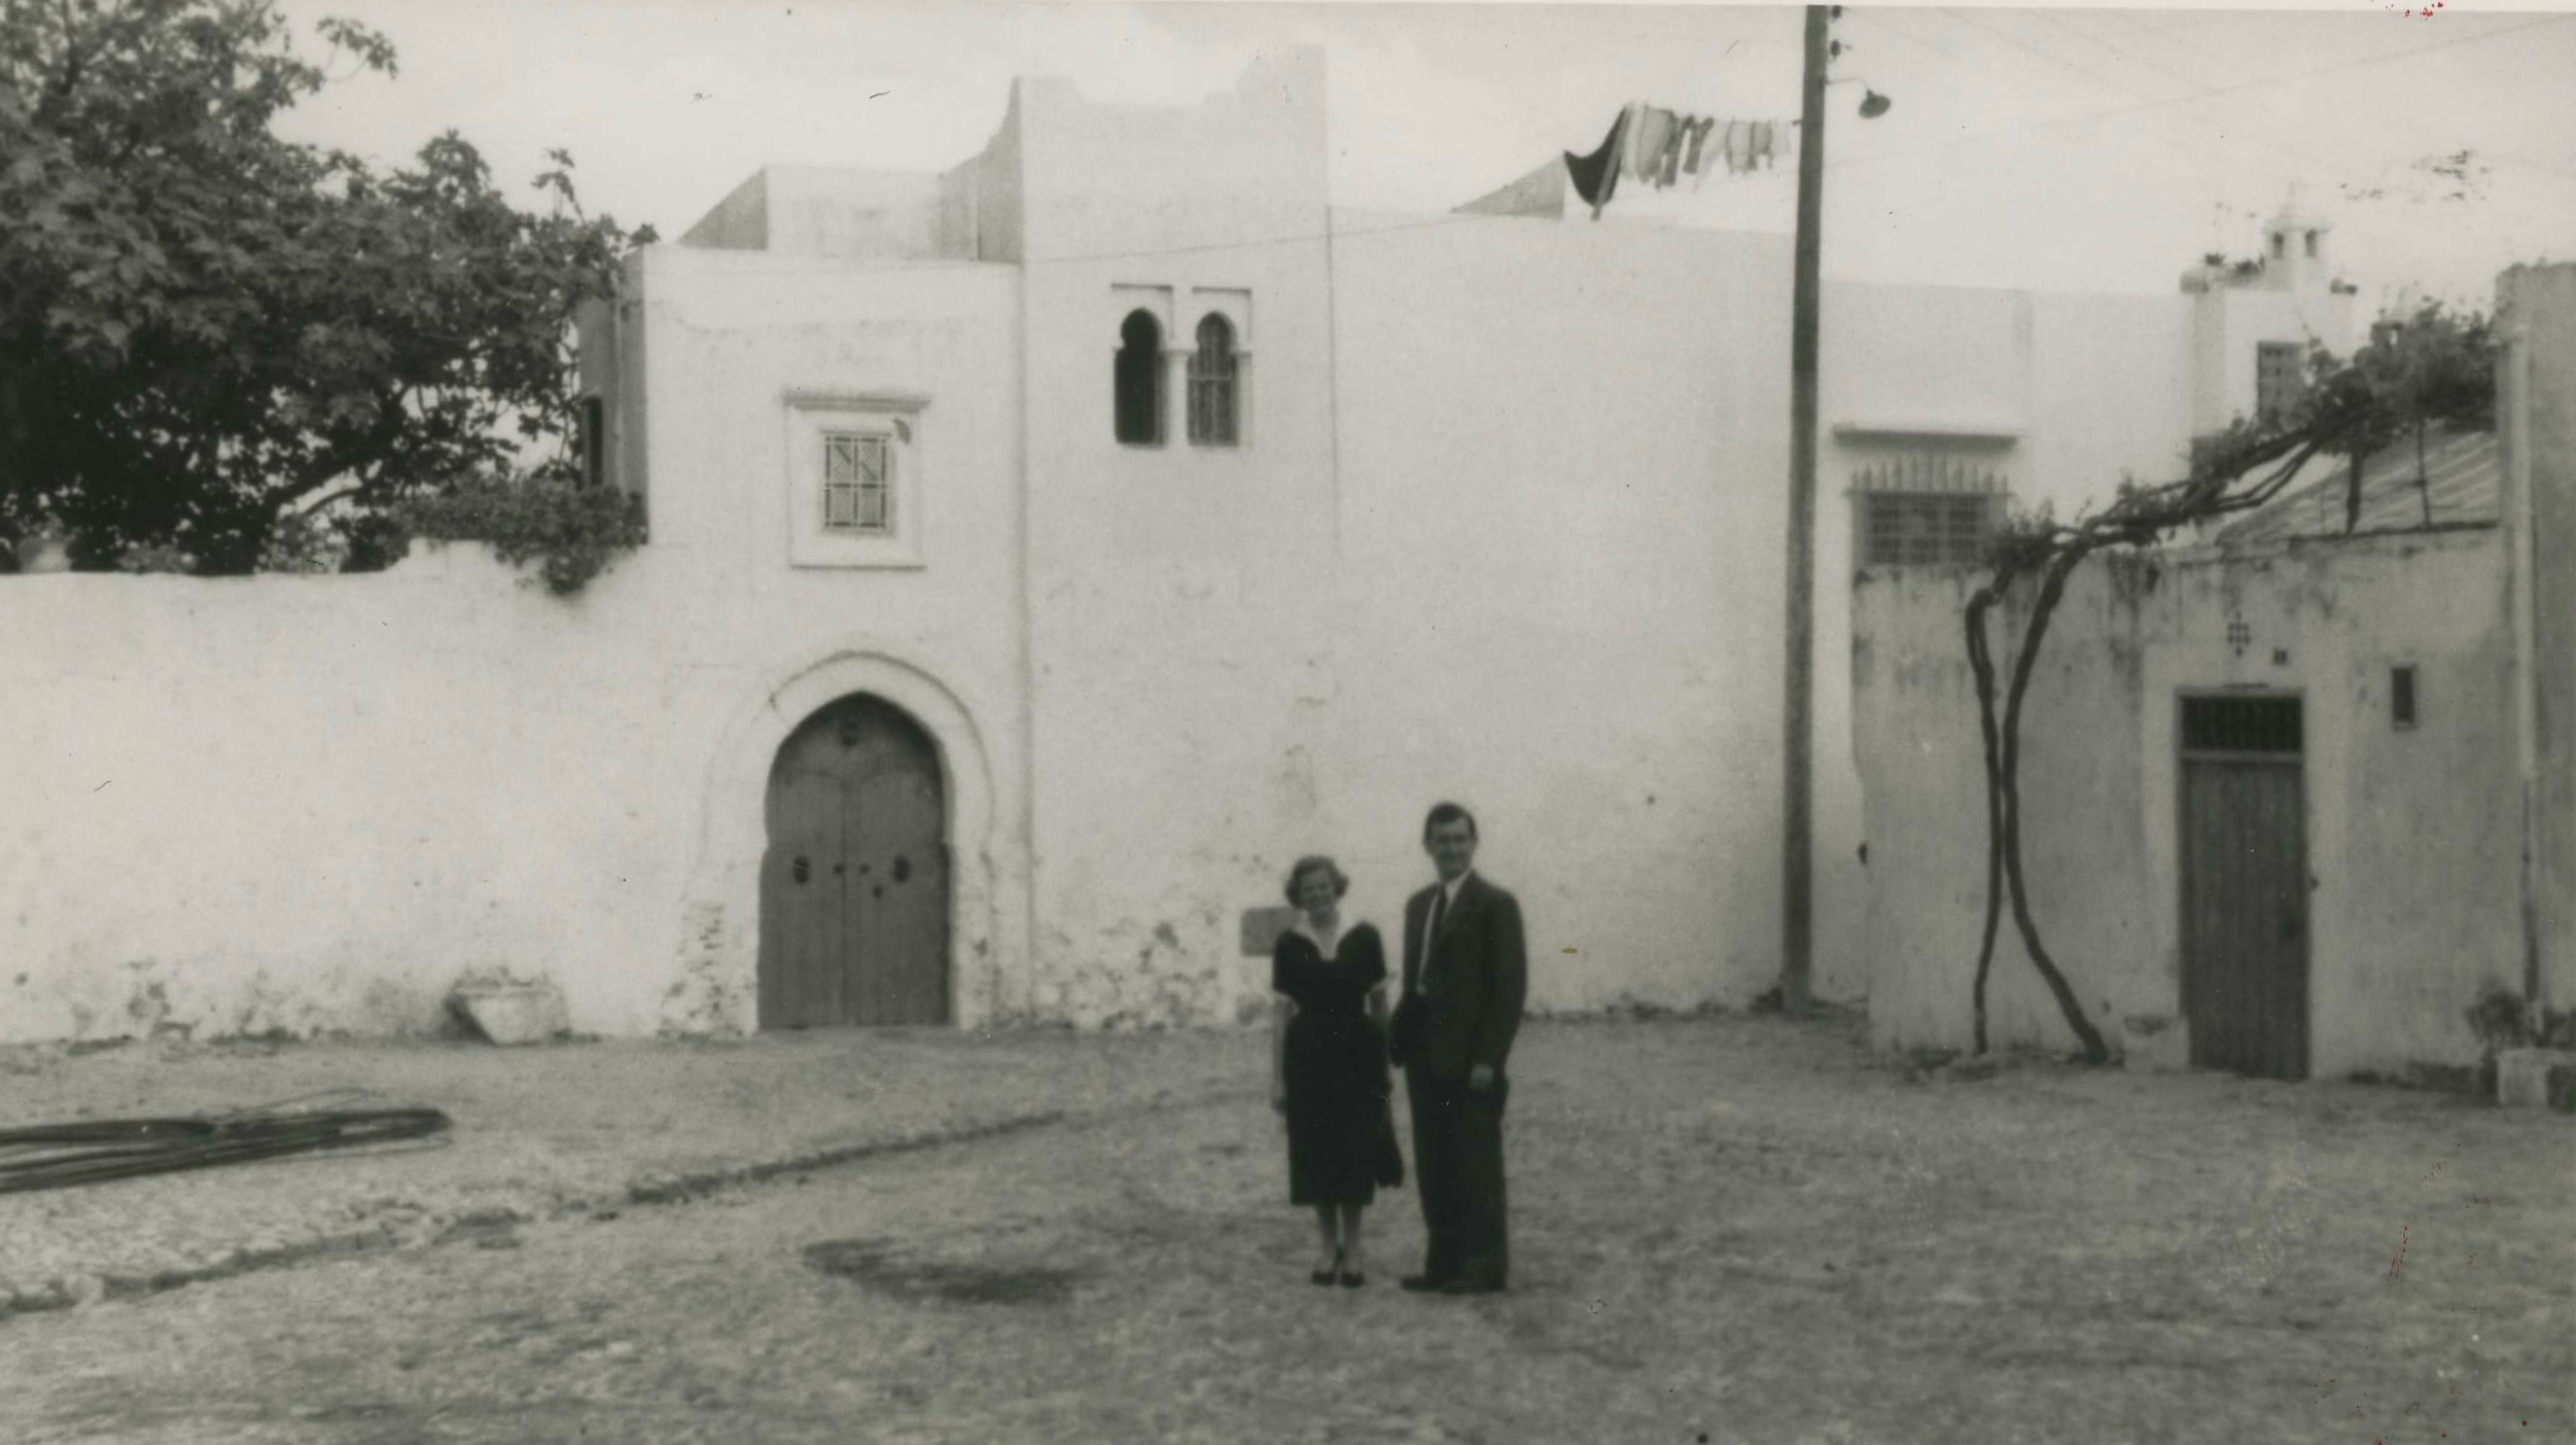 Stuart & Sylvia Gates in front of their residence at 0 Place de la Casbah, Bab al-Assa to the right